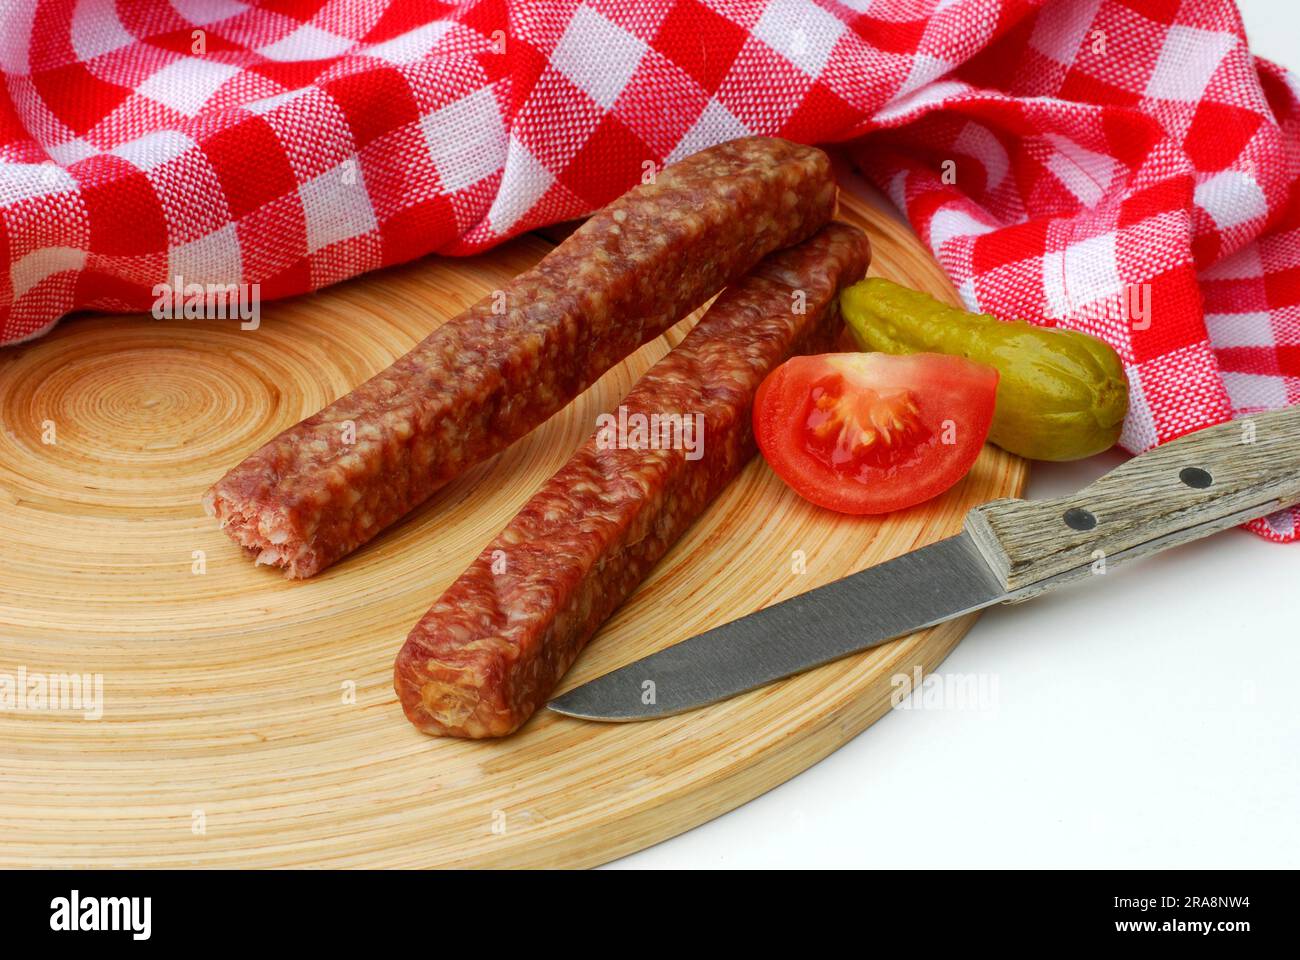 Mettwurst on wooden board and knife, Landjaeger, hard sausage, sausage Stock Photo